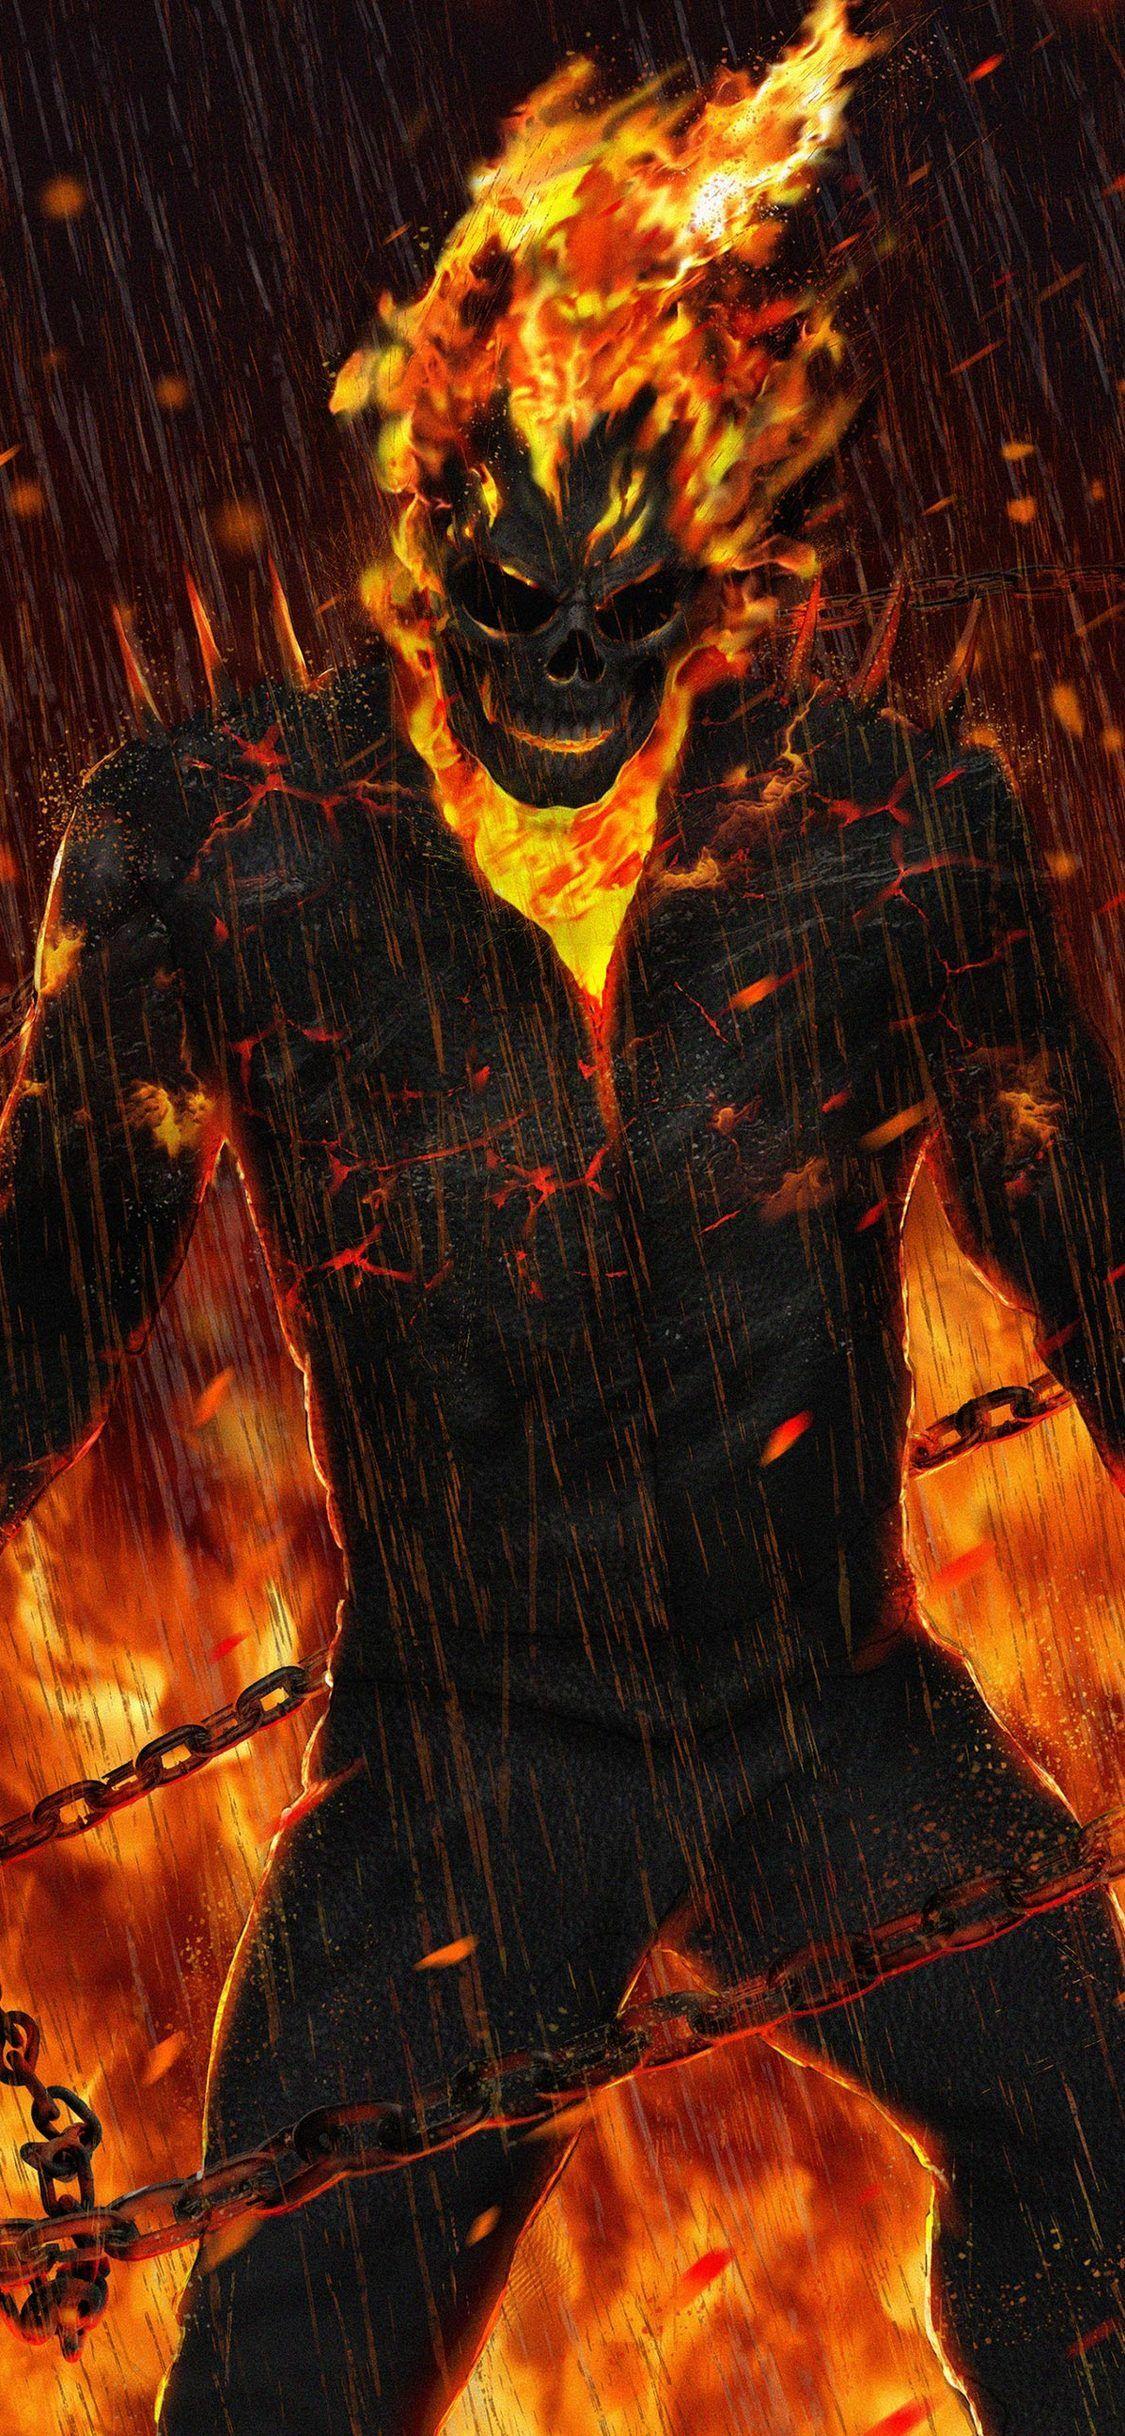 Ghost Rider iPhone Wallpaper Free Ghost Rider iPhone